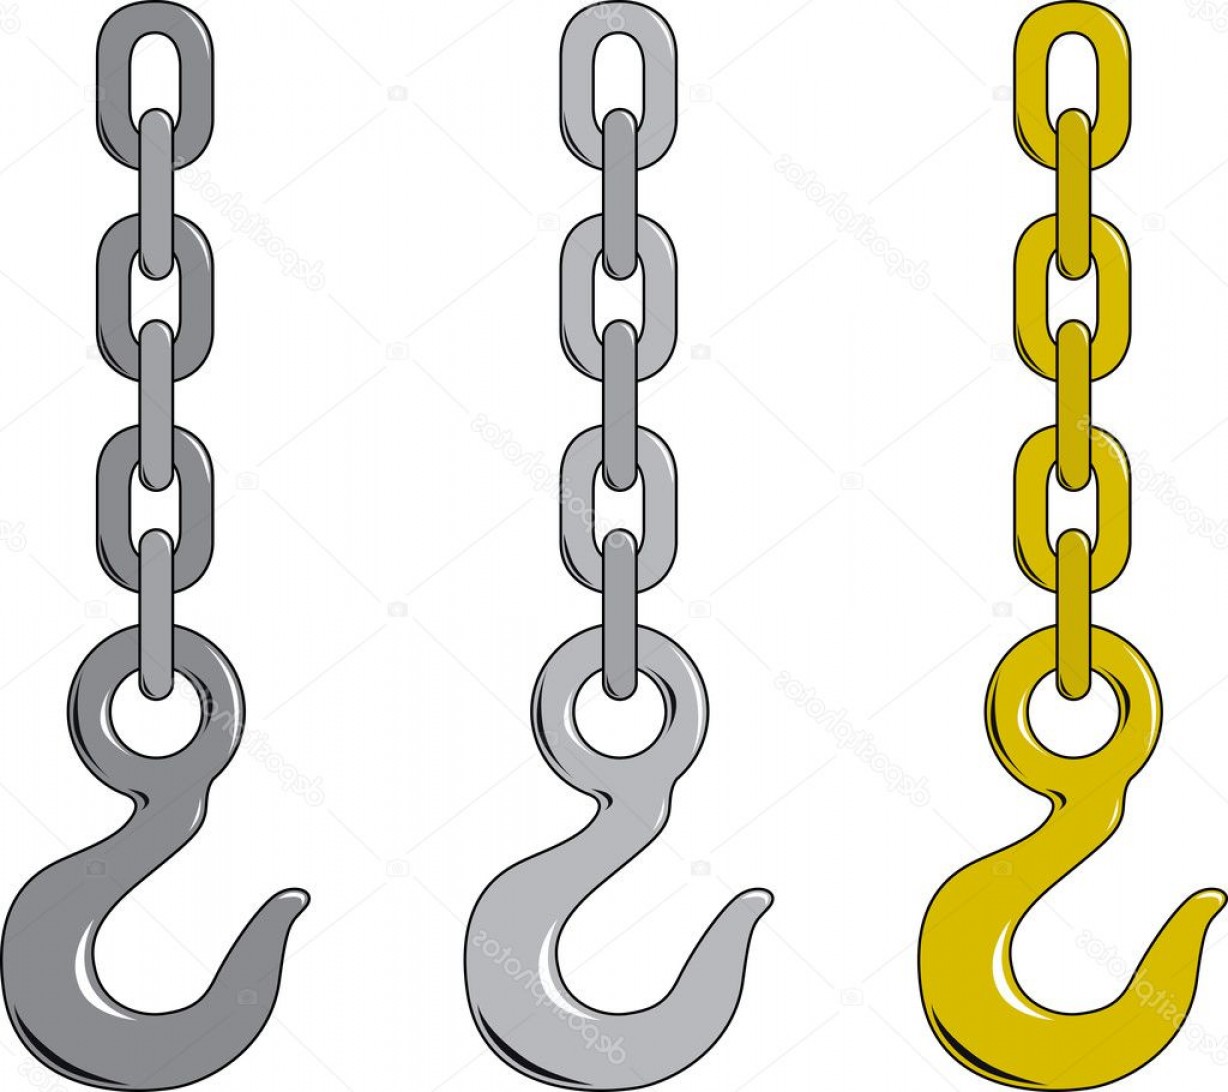 Tow Hook And Chain Clip Art